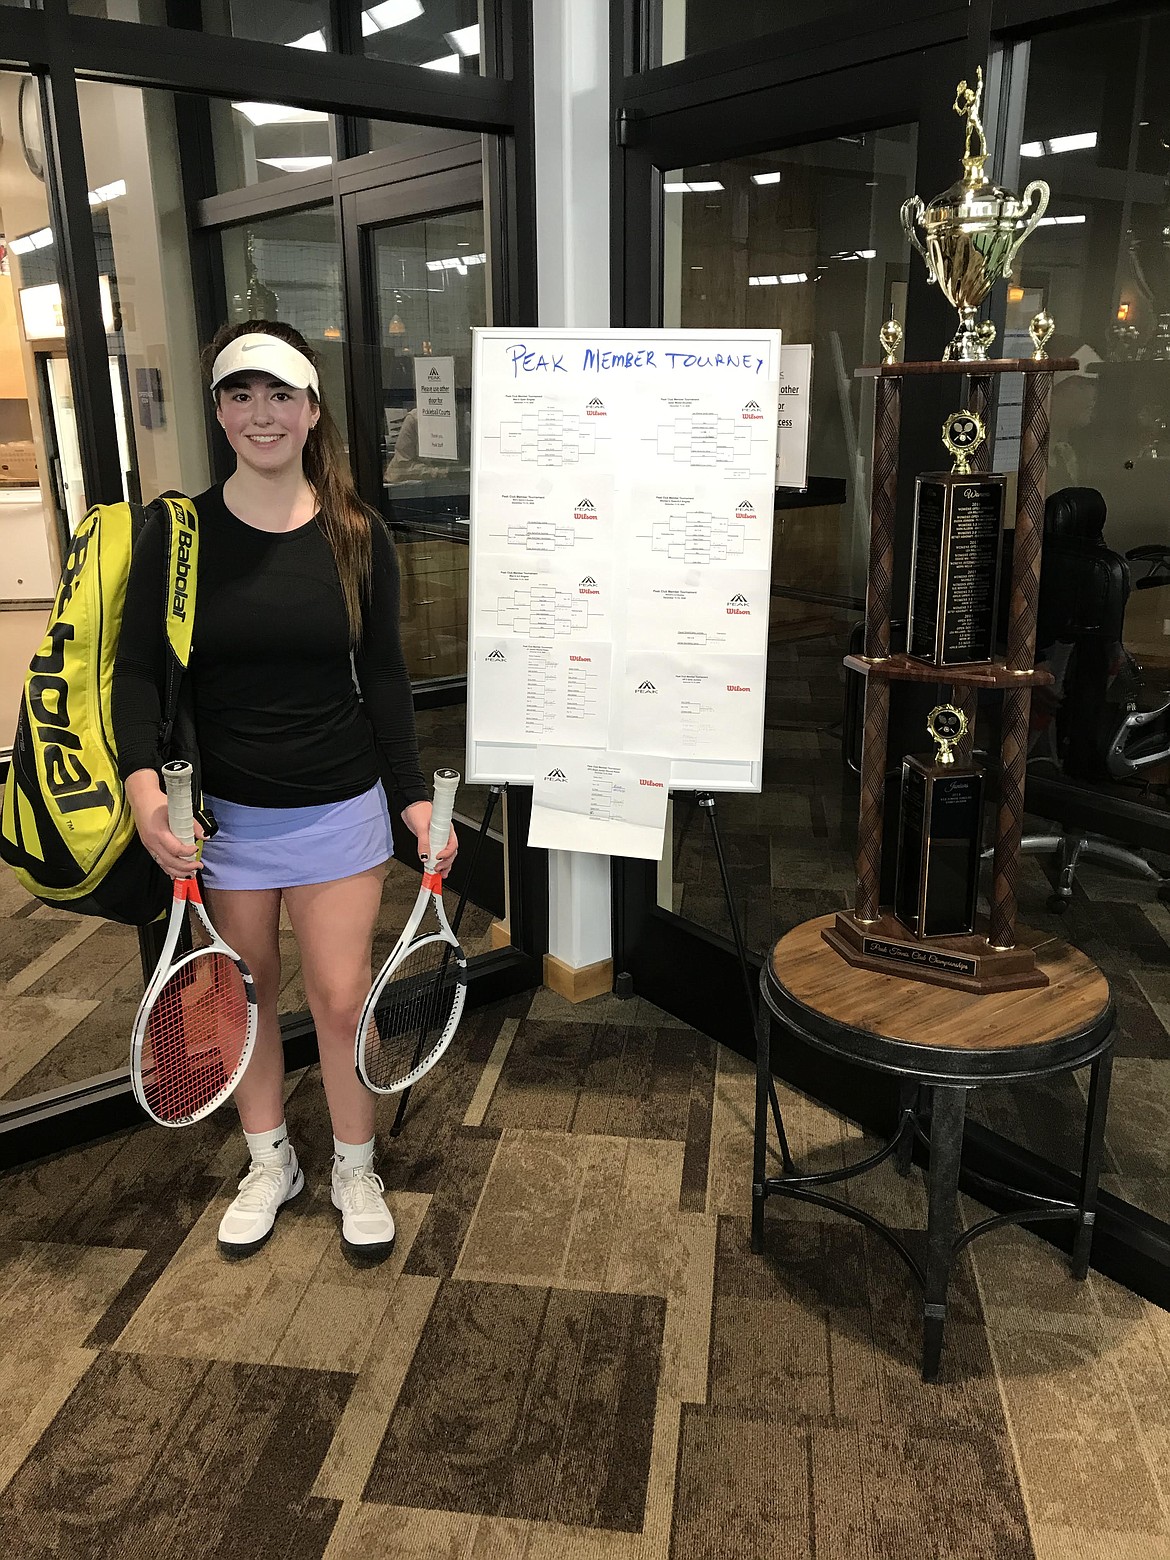 Courtesy photo
Amy Corrette won the junior girls singles division at the recent Peak Hayden Member Club Tennis Tournament at Peak Health and Wellness in Hayden. Christina Glass was the other finalist.